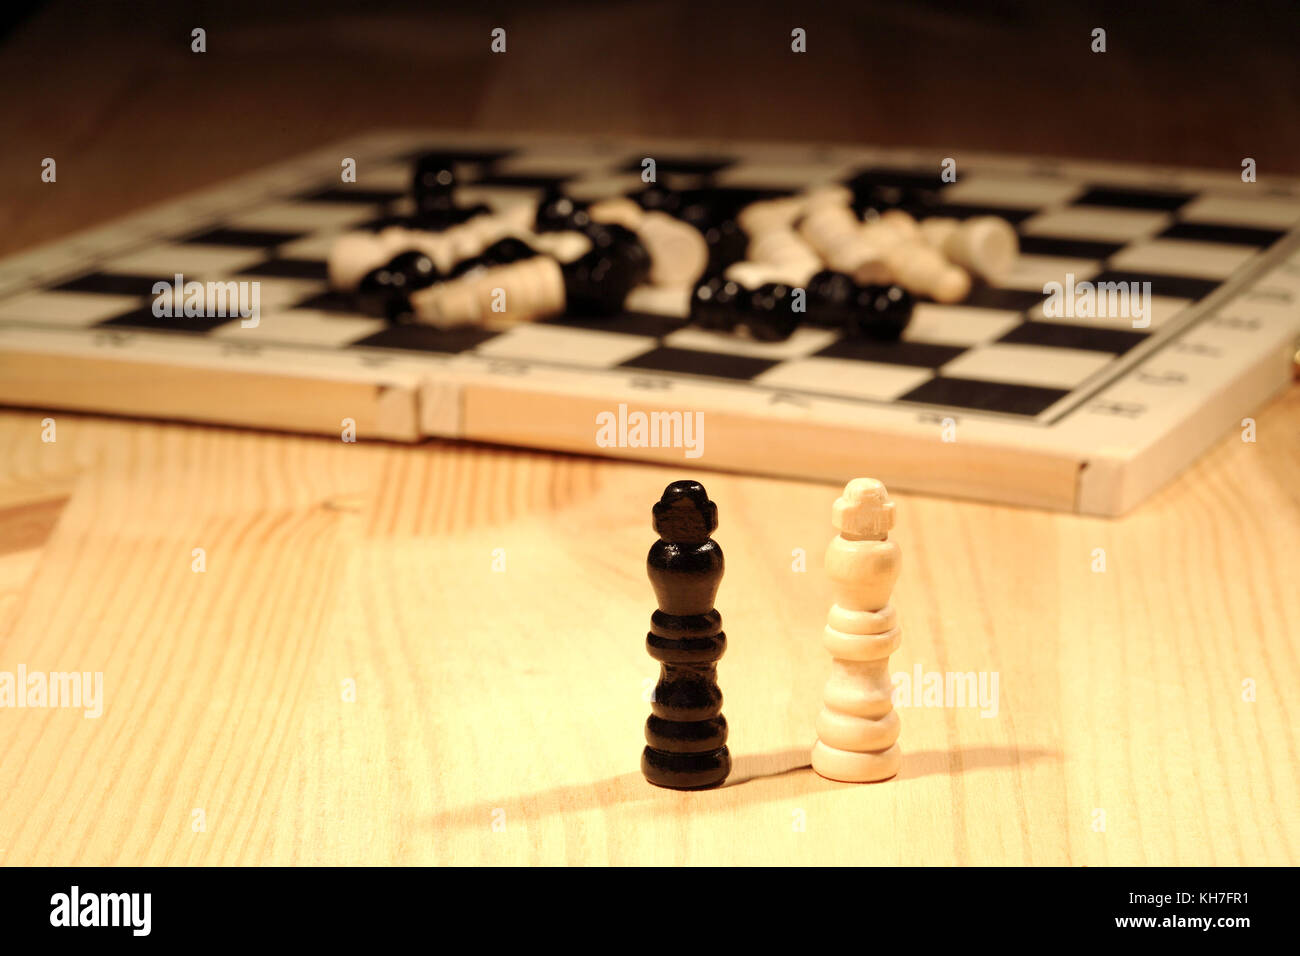 Chess concept. Two chessmen standing near chess board on wooden background Stock Photo